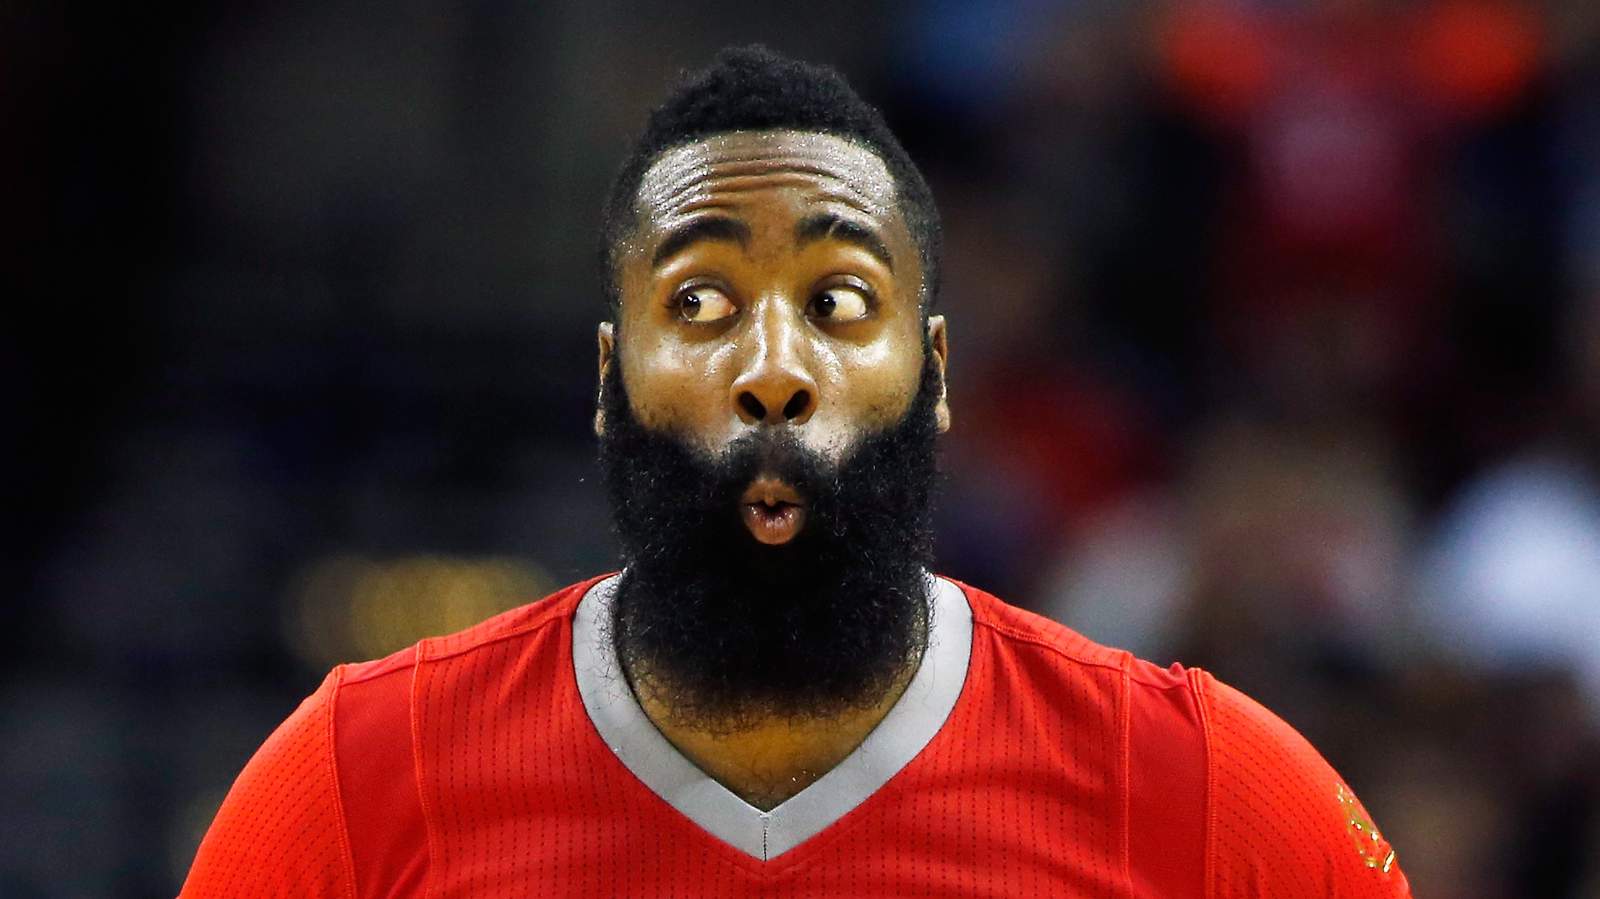 Need a job? Here’s how to go to work for Rockets star James Harden